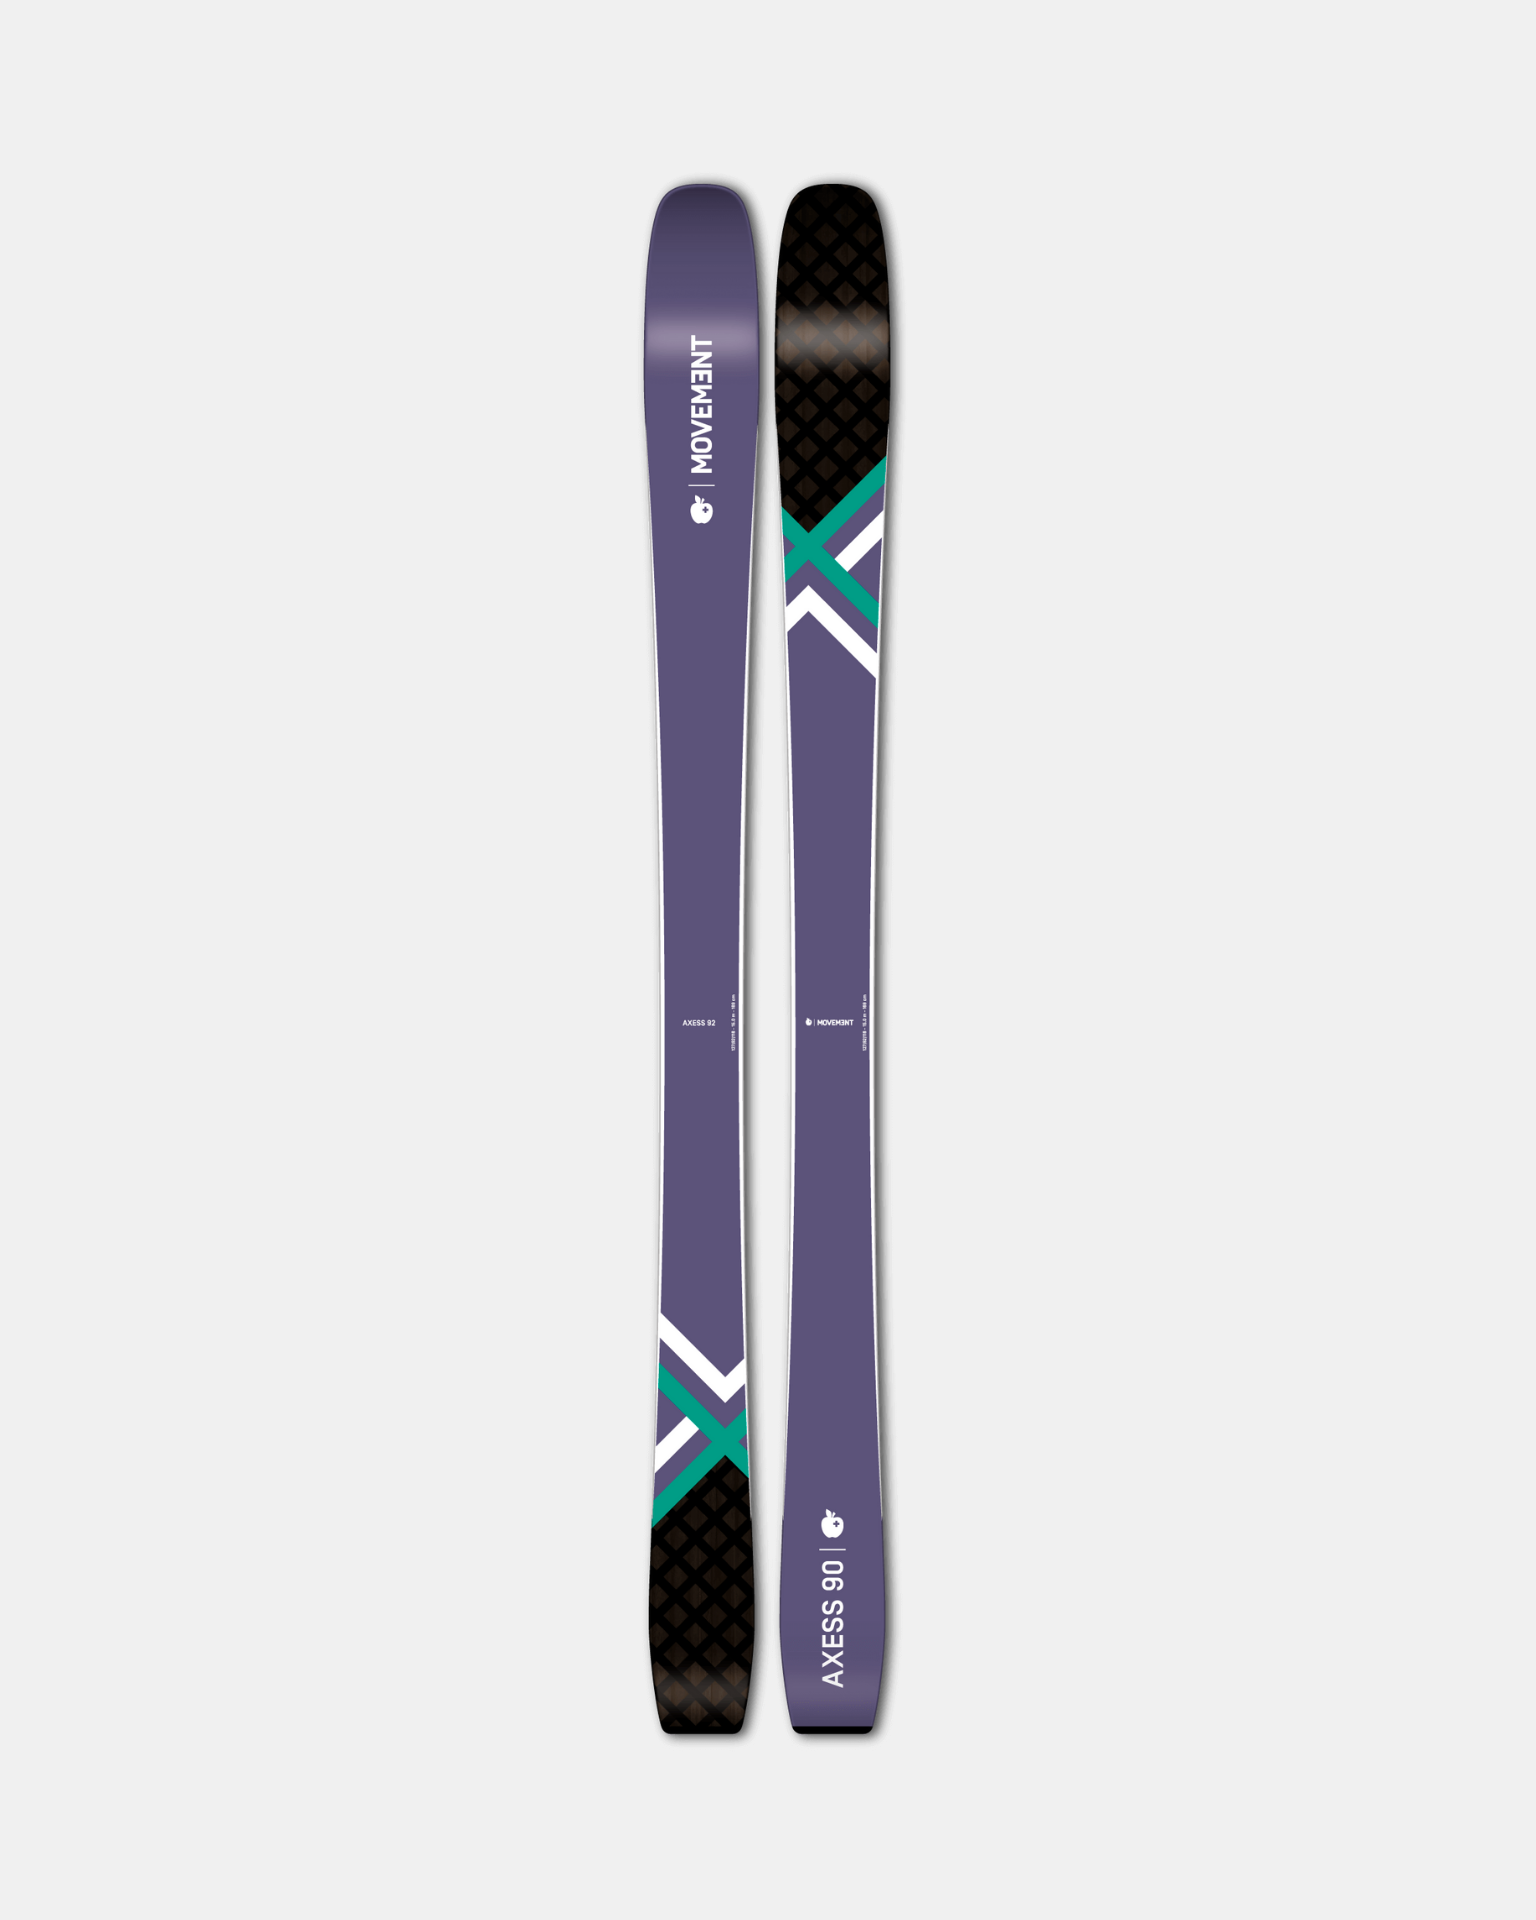 Elevate your skiing game with Movement's precision-engineered Axess 90 Women's skis.